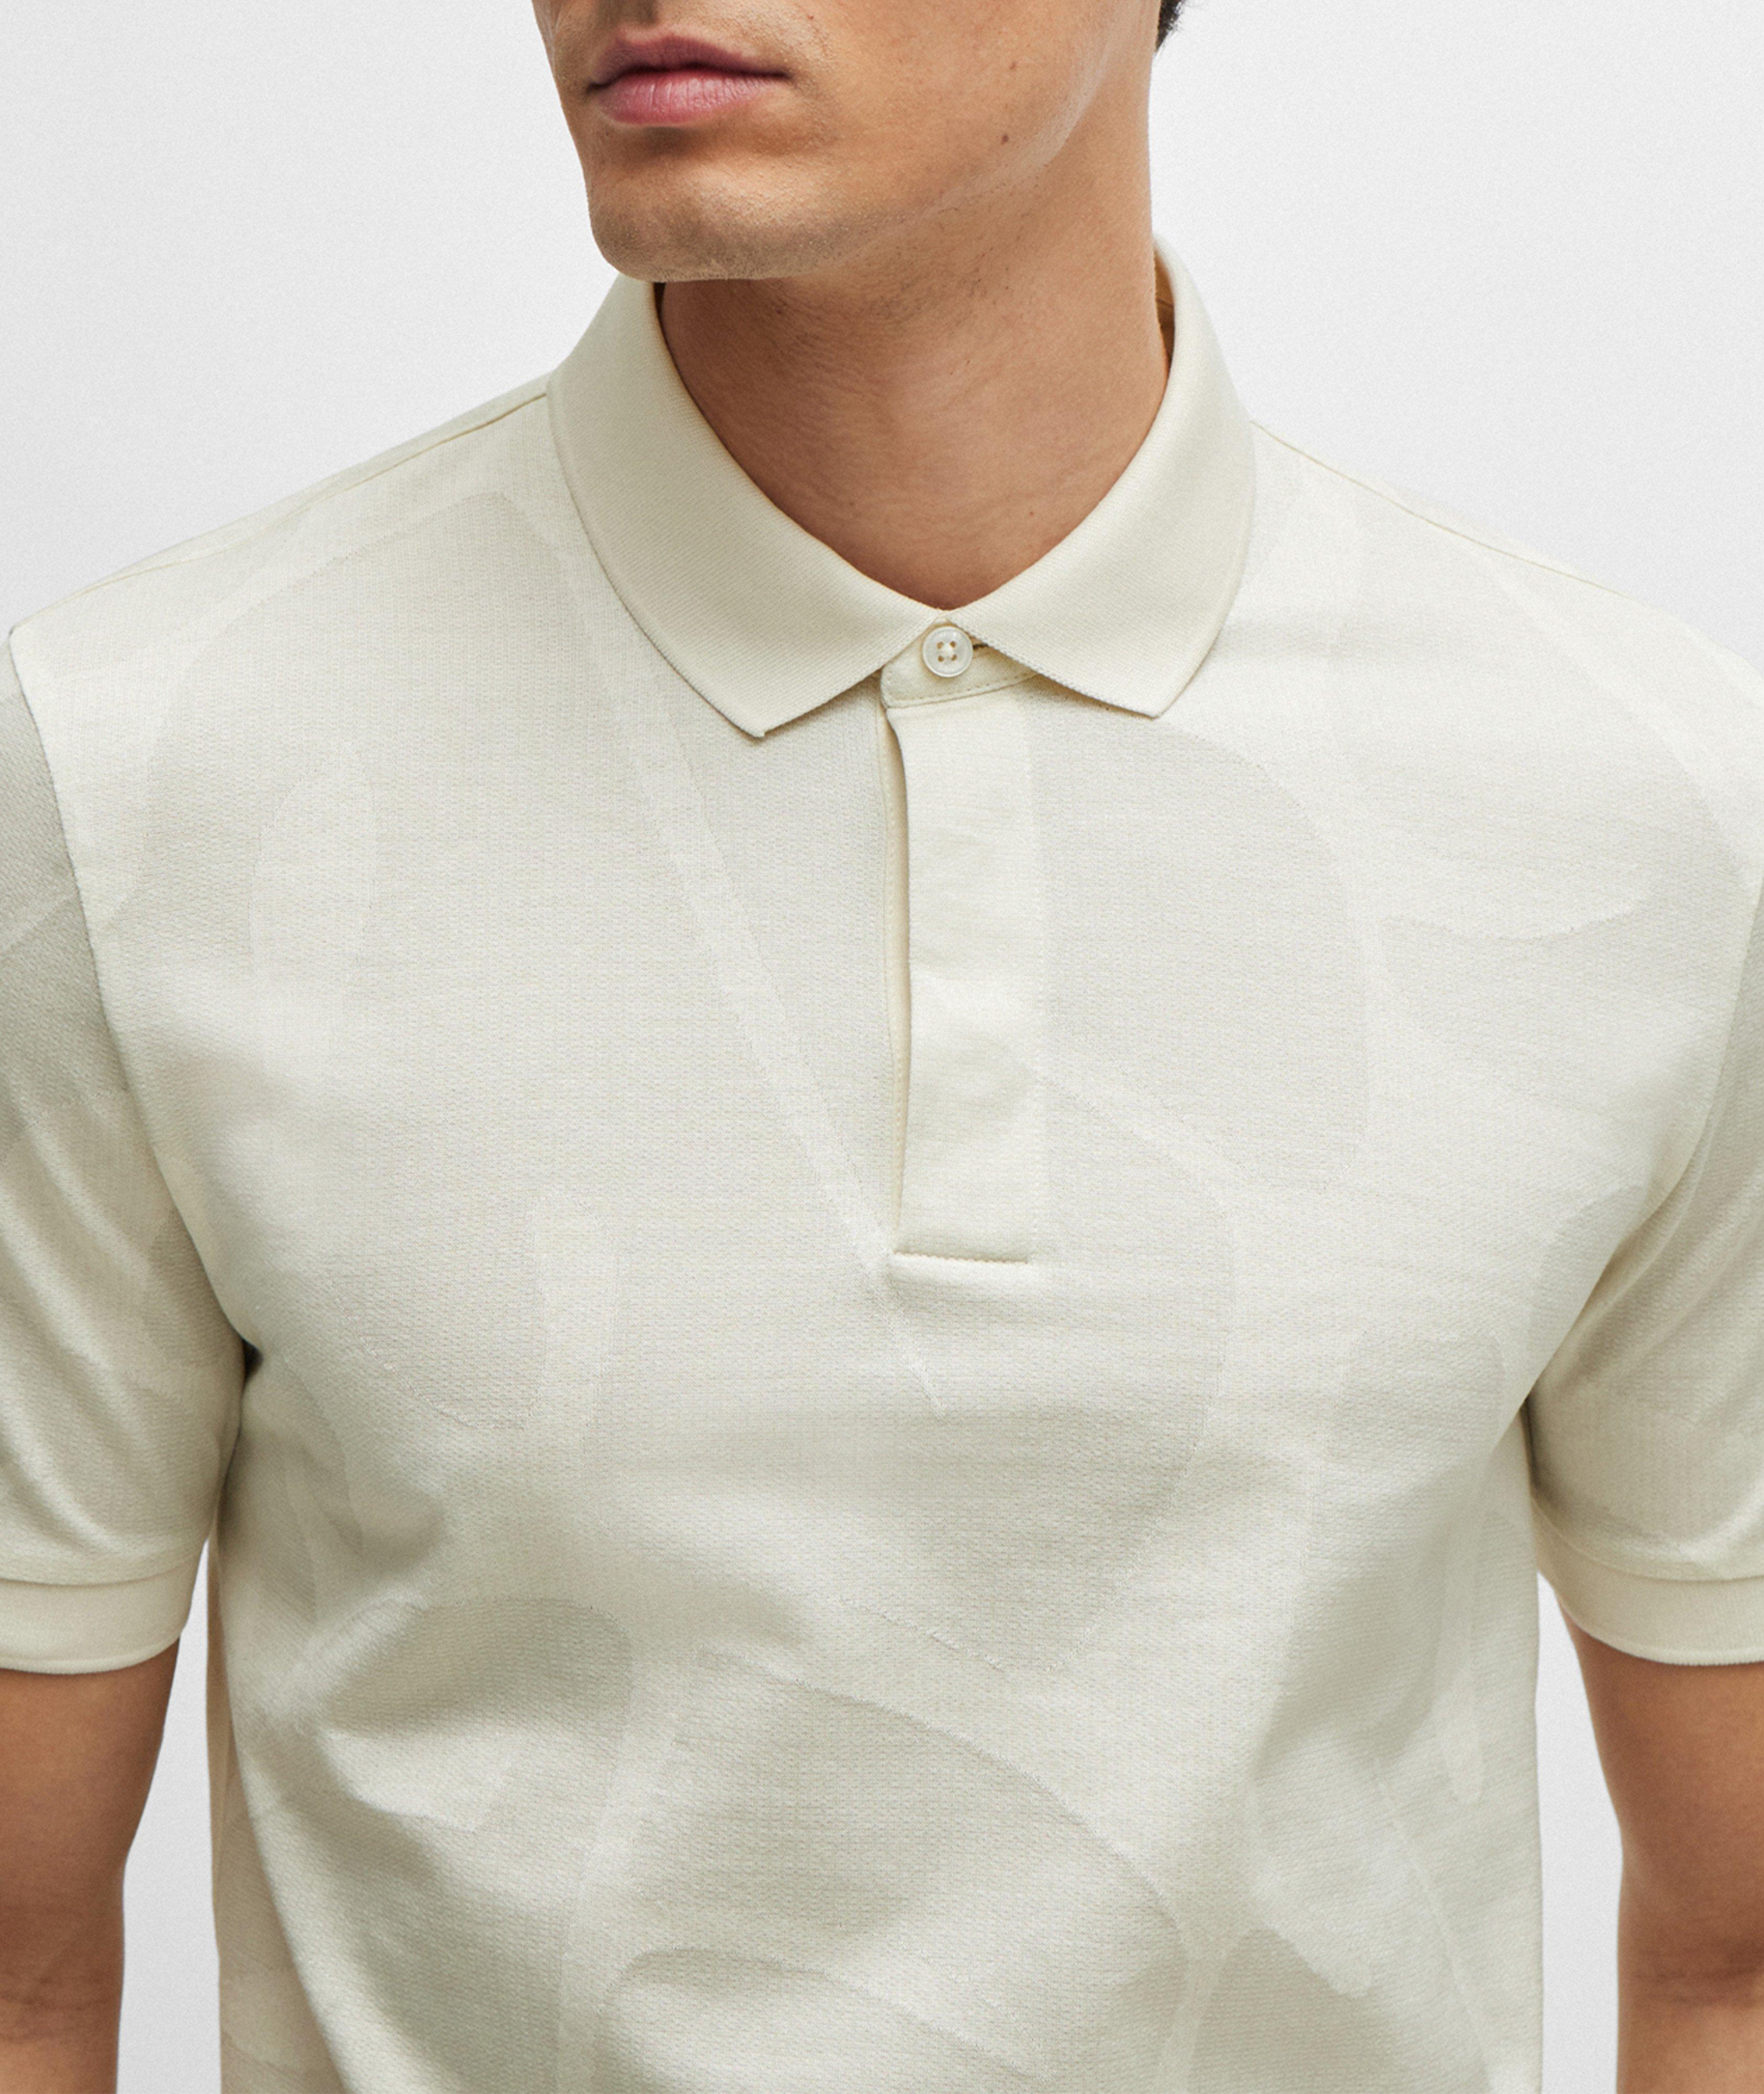 All-Over Monstera Leaf Cotton Polo image 3